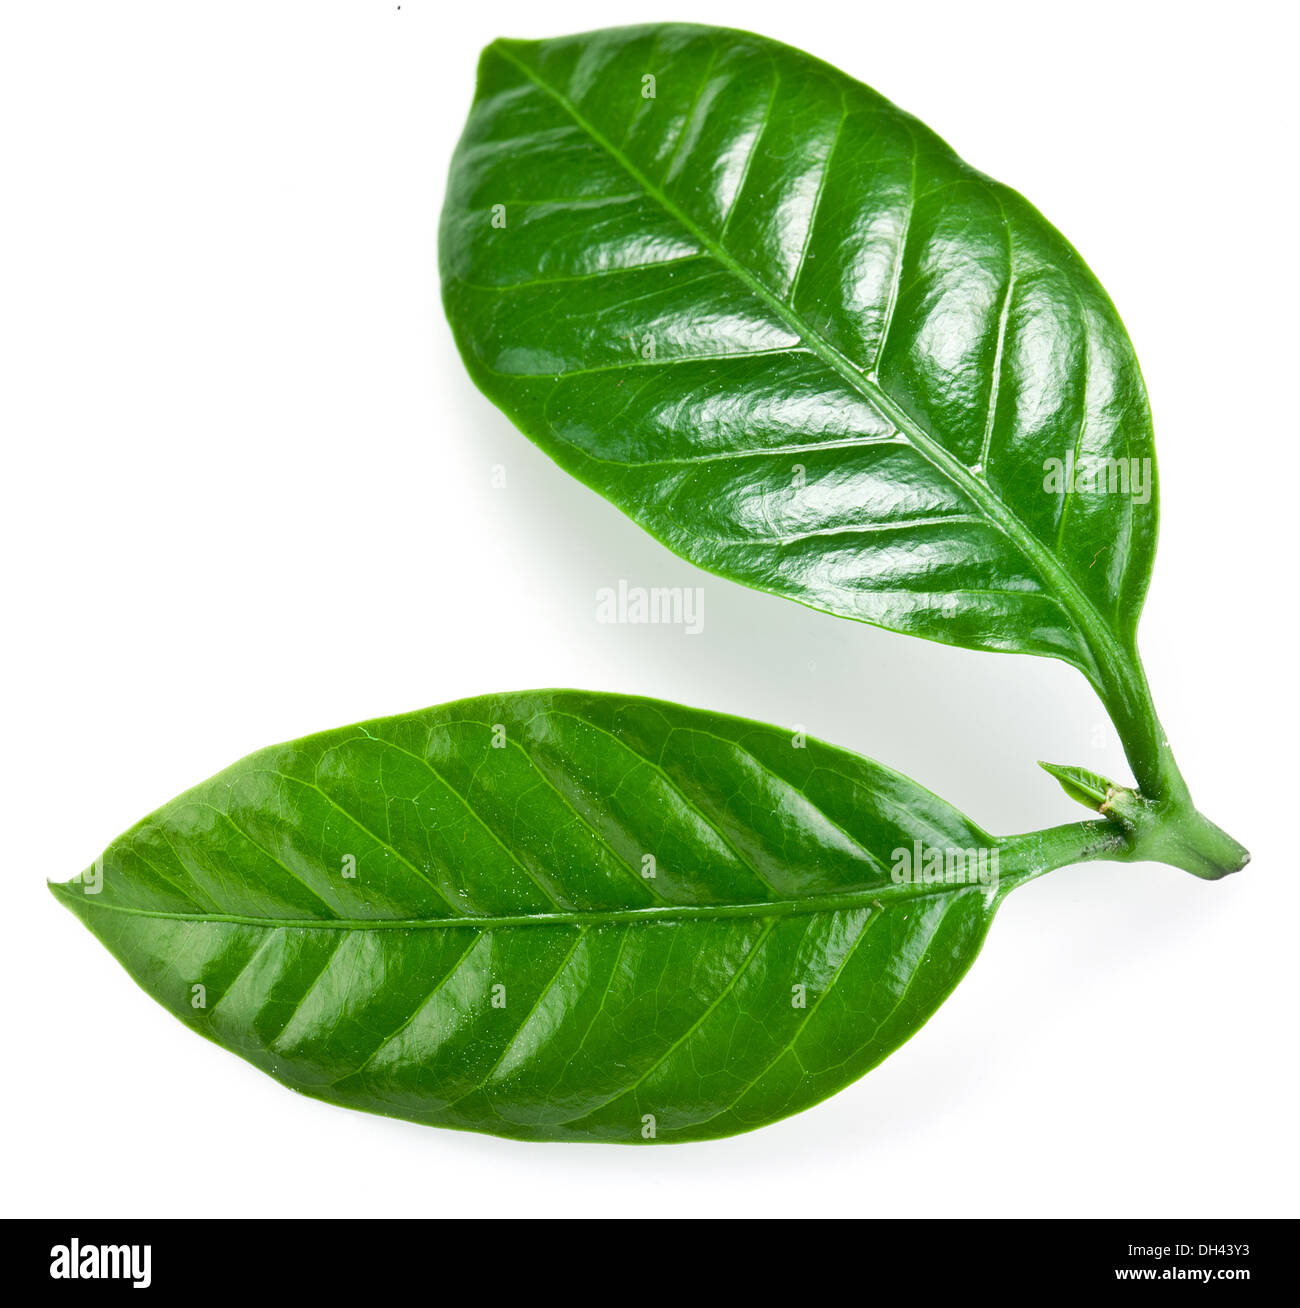 Green coffee leaves isolated on a white background. Stock Photo